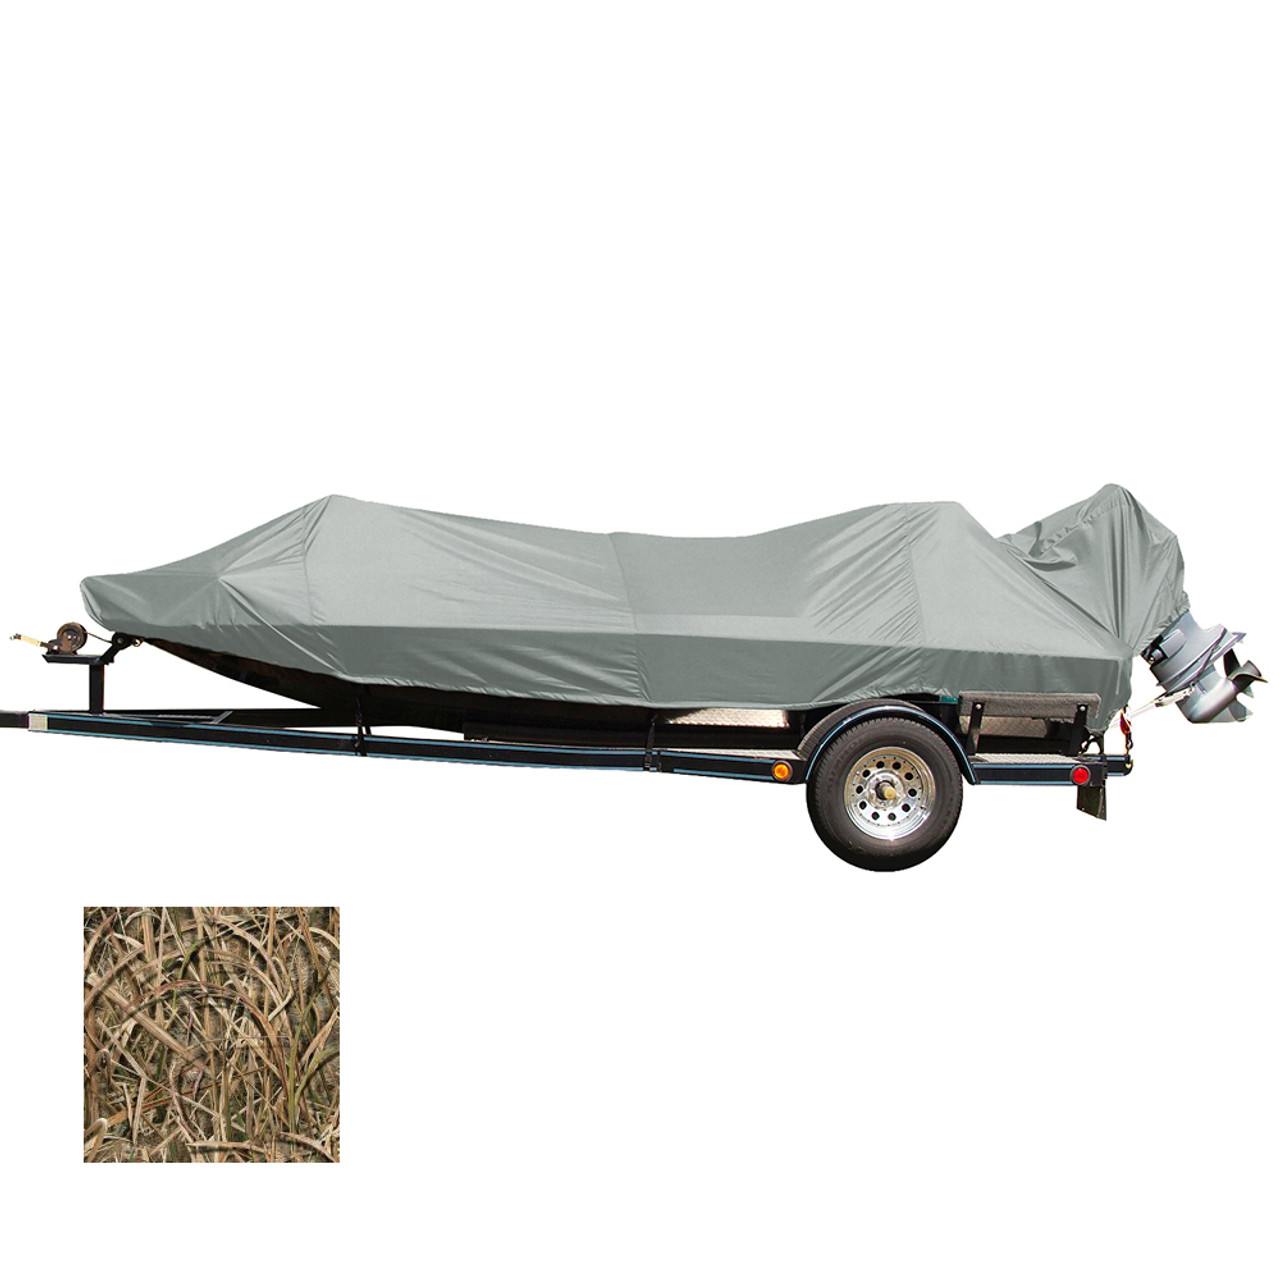 Carver Performance Poly-Guard Styled-to-Fit Boat Cover F-17.5' Jon Style Bass Boats - Shadow Grass